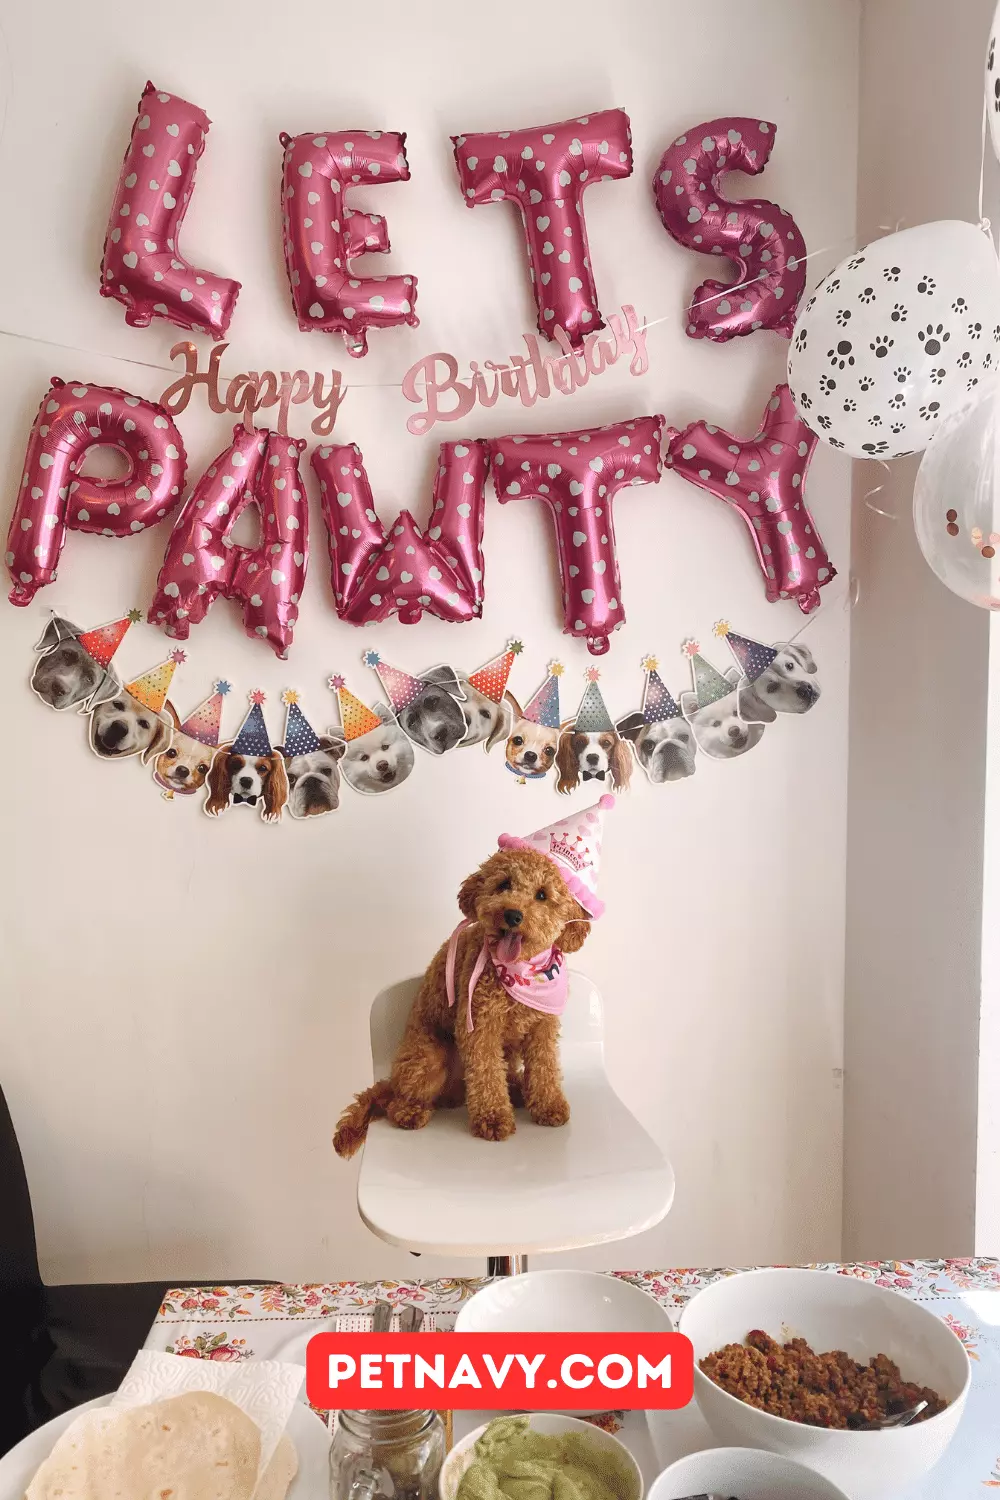 Dog Birthday Party Themes: 7 Best Ideas to Celebrate